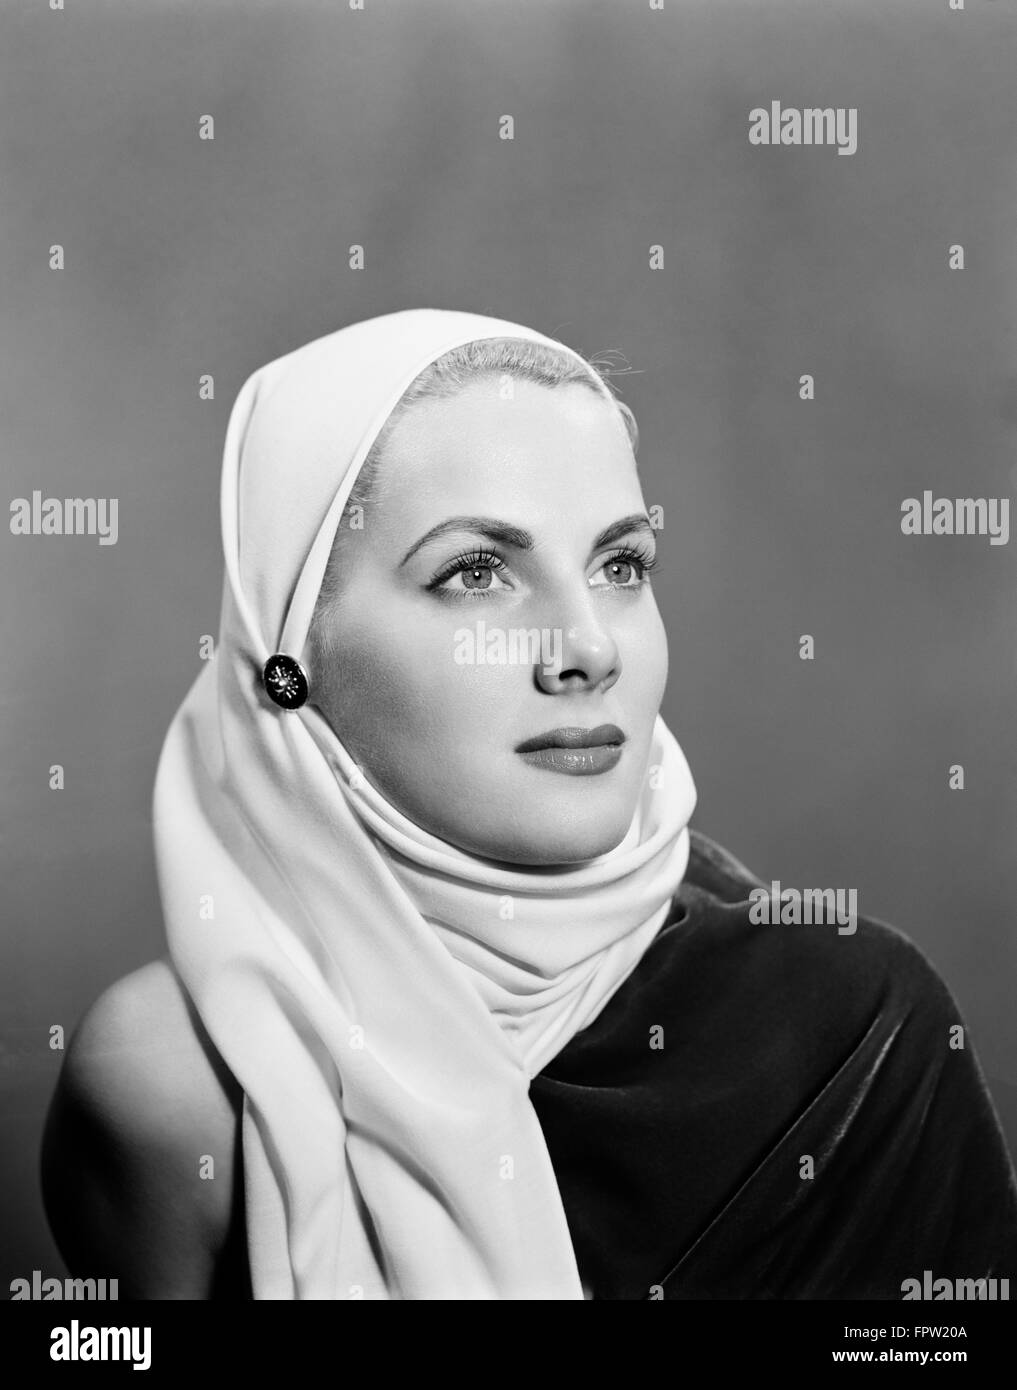 Années 1940 Années 1950 YOUNG BLONDE WOMAN WEARING WHITE FOULARD COWL HOOD Banque D'Images